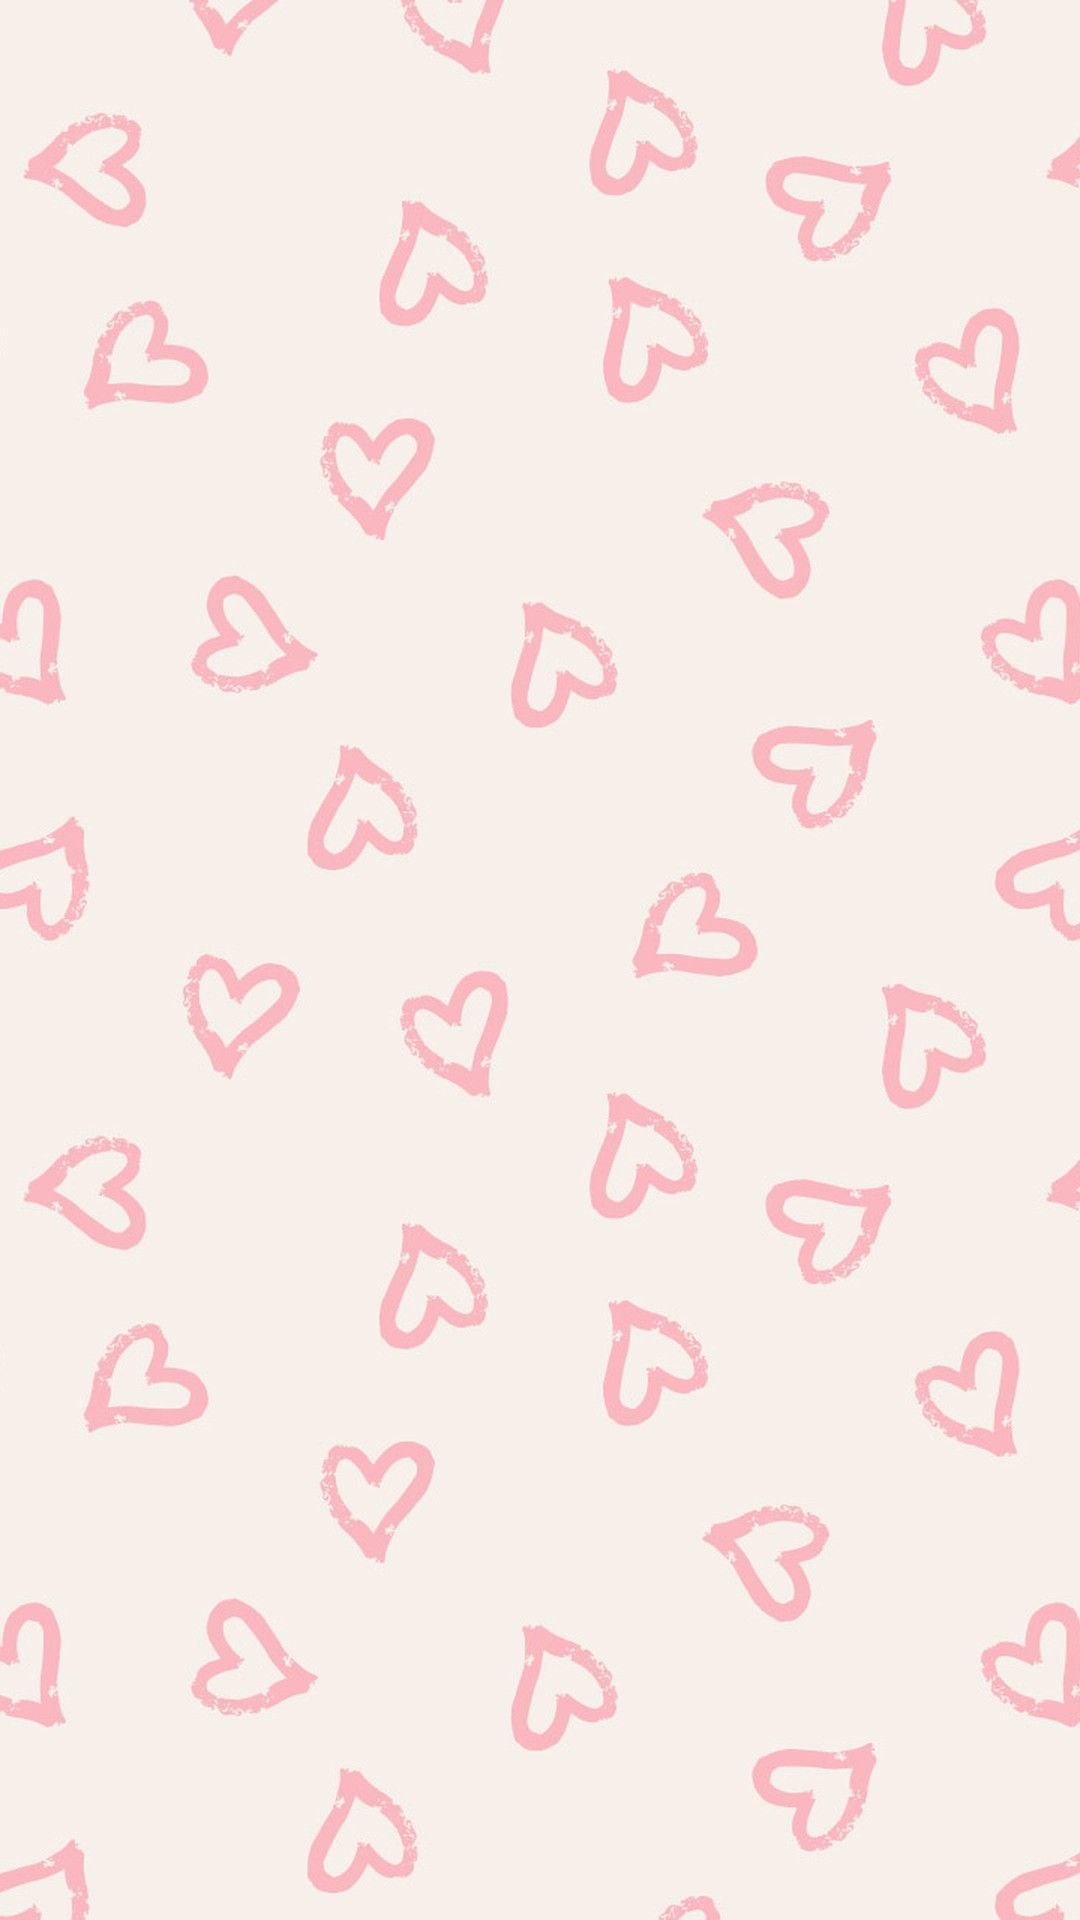 Really Cute Preppy Aesthetic Wallpaper For Your Phone!